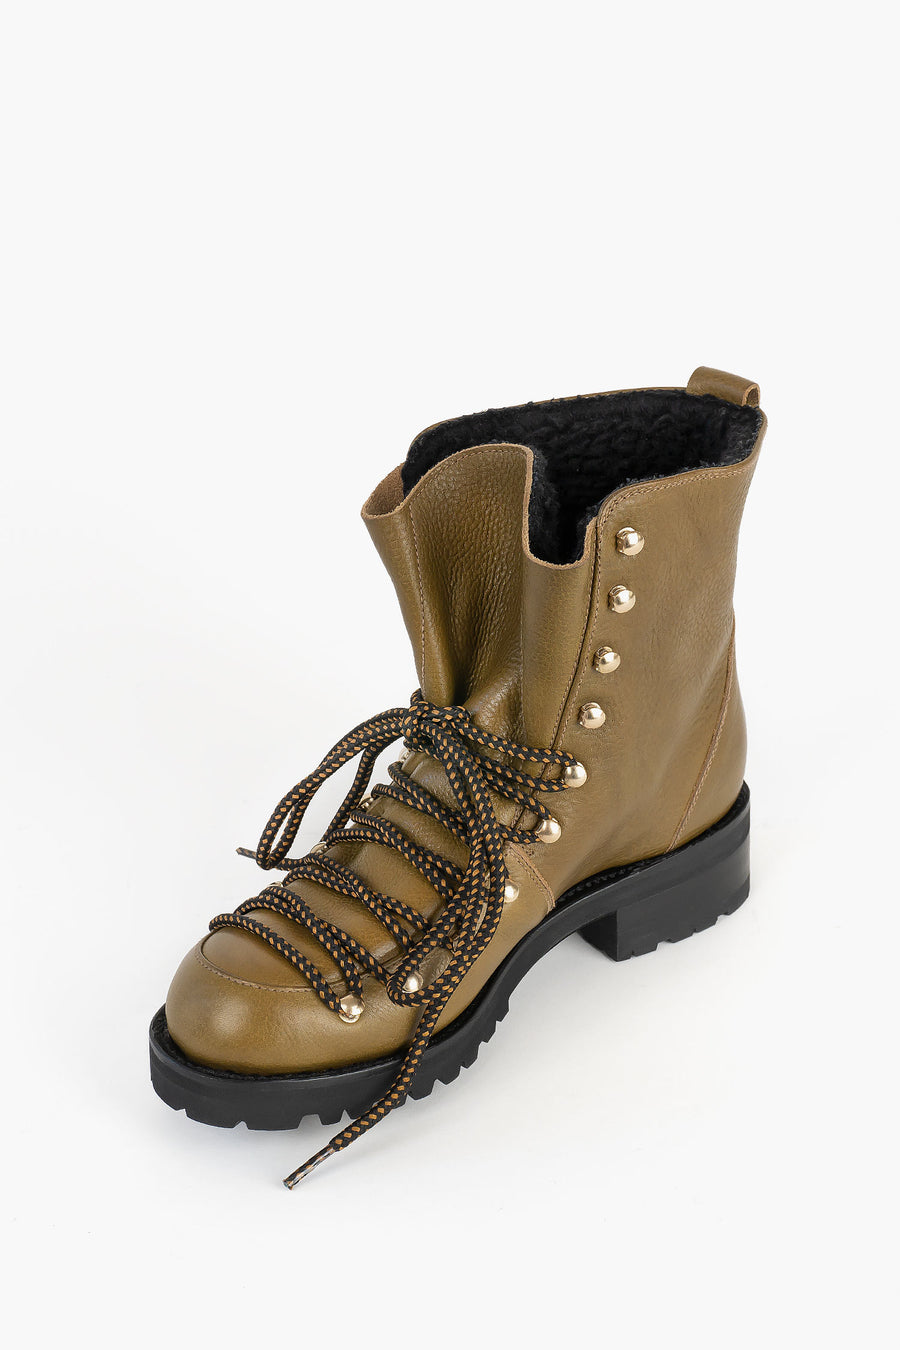 Sustainable, goodyear-welted boots made in Spain. 